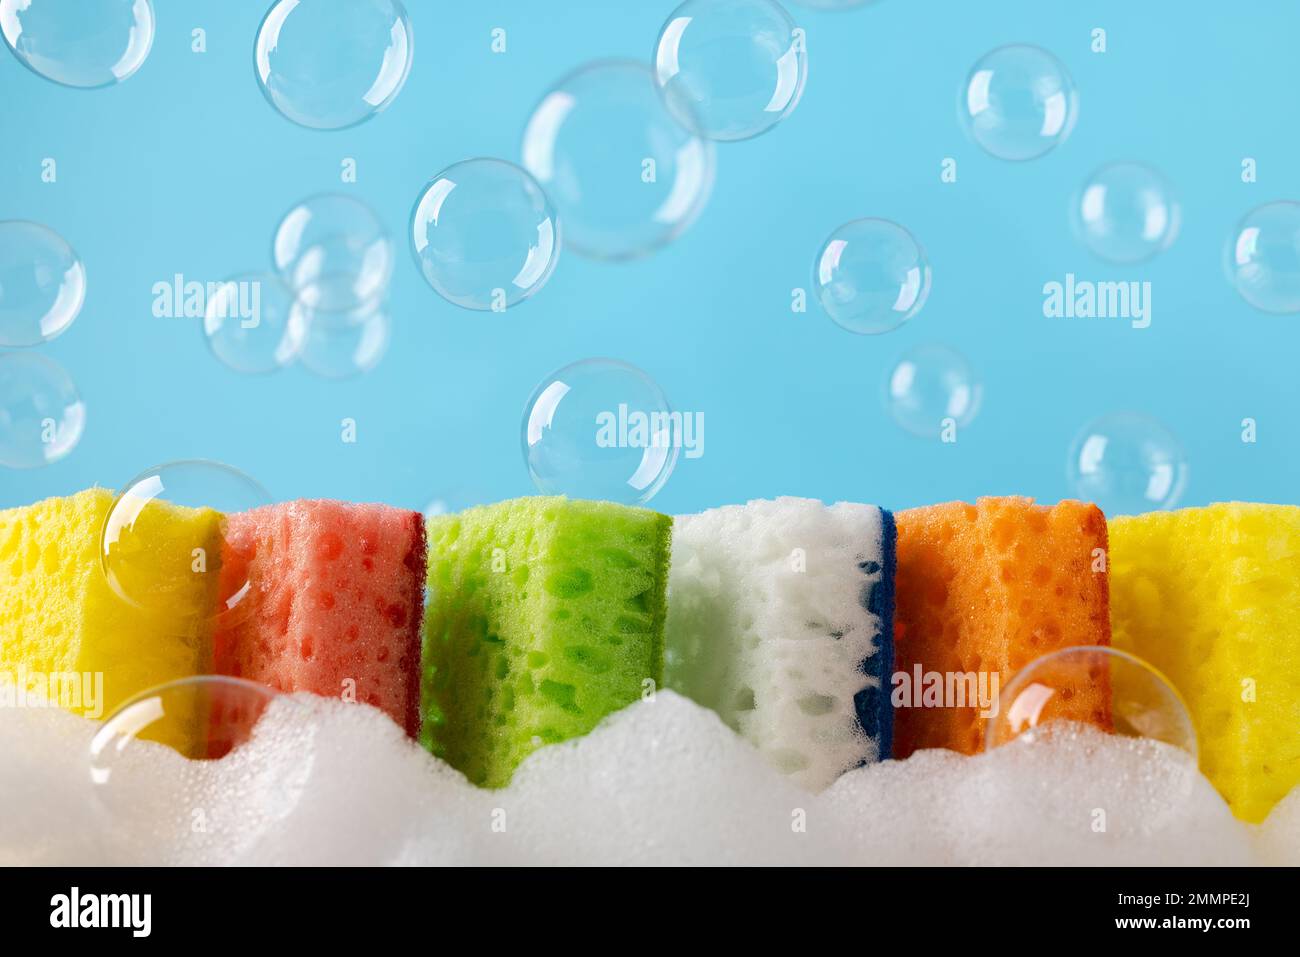 https://c8.alamy.com/comp/2MMPE2J/household-cleaning-scrub-colored-sponges-with-soap-foam-and-bubbles-kitchen-dishwashing-sponge-on-blue-background-cleaning-home-concept-space-for-t-2MMPE2J.jpg